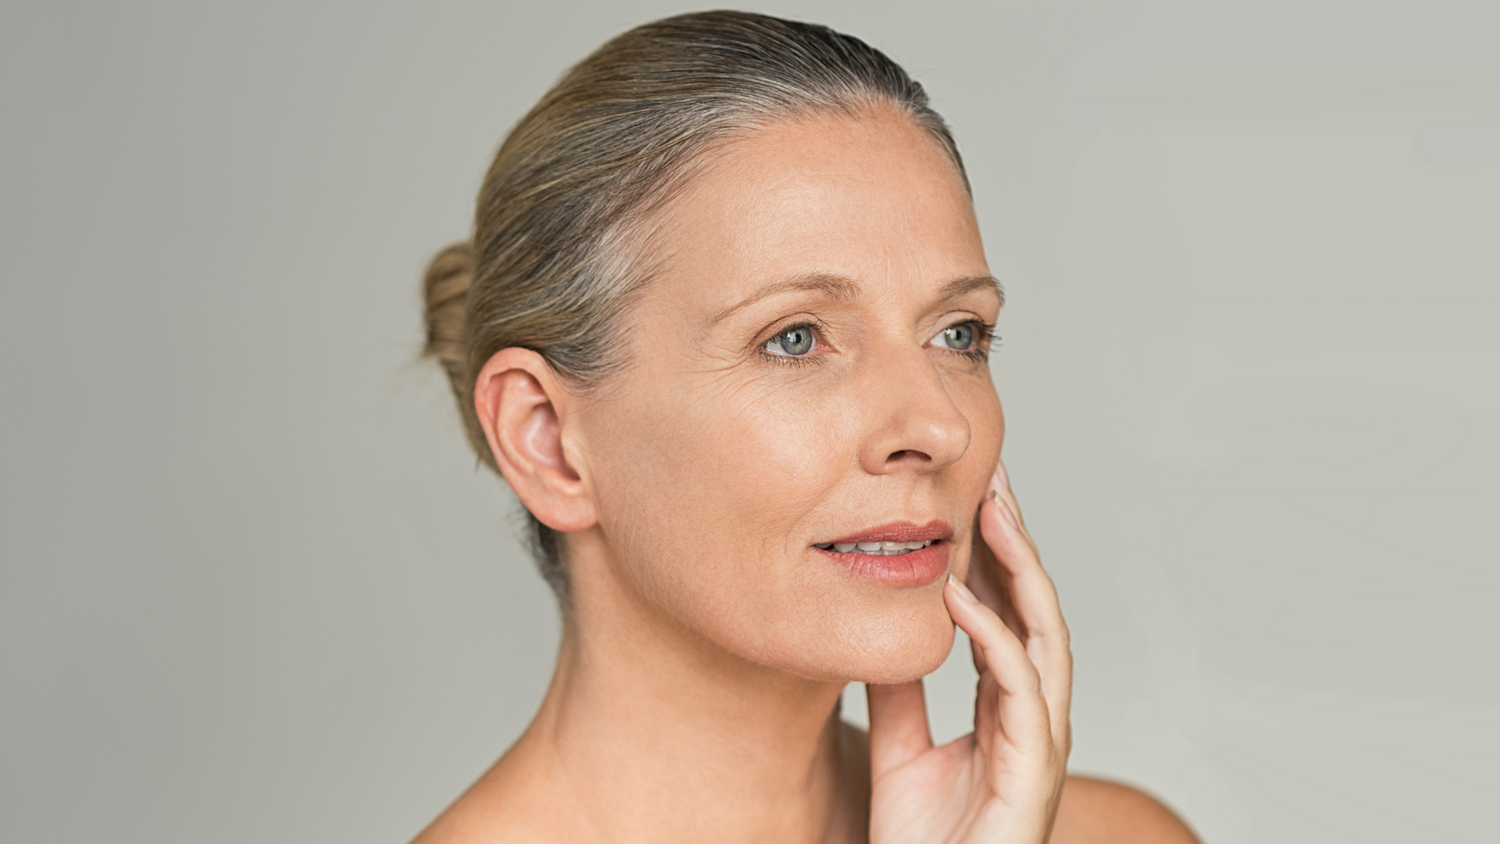 What is a Non-Surgical facelift?